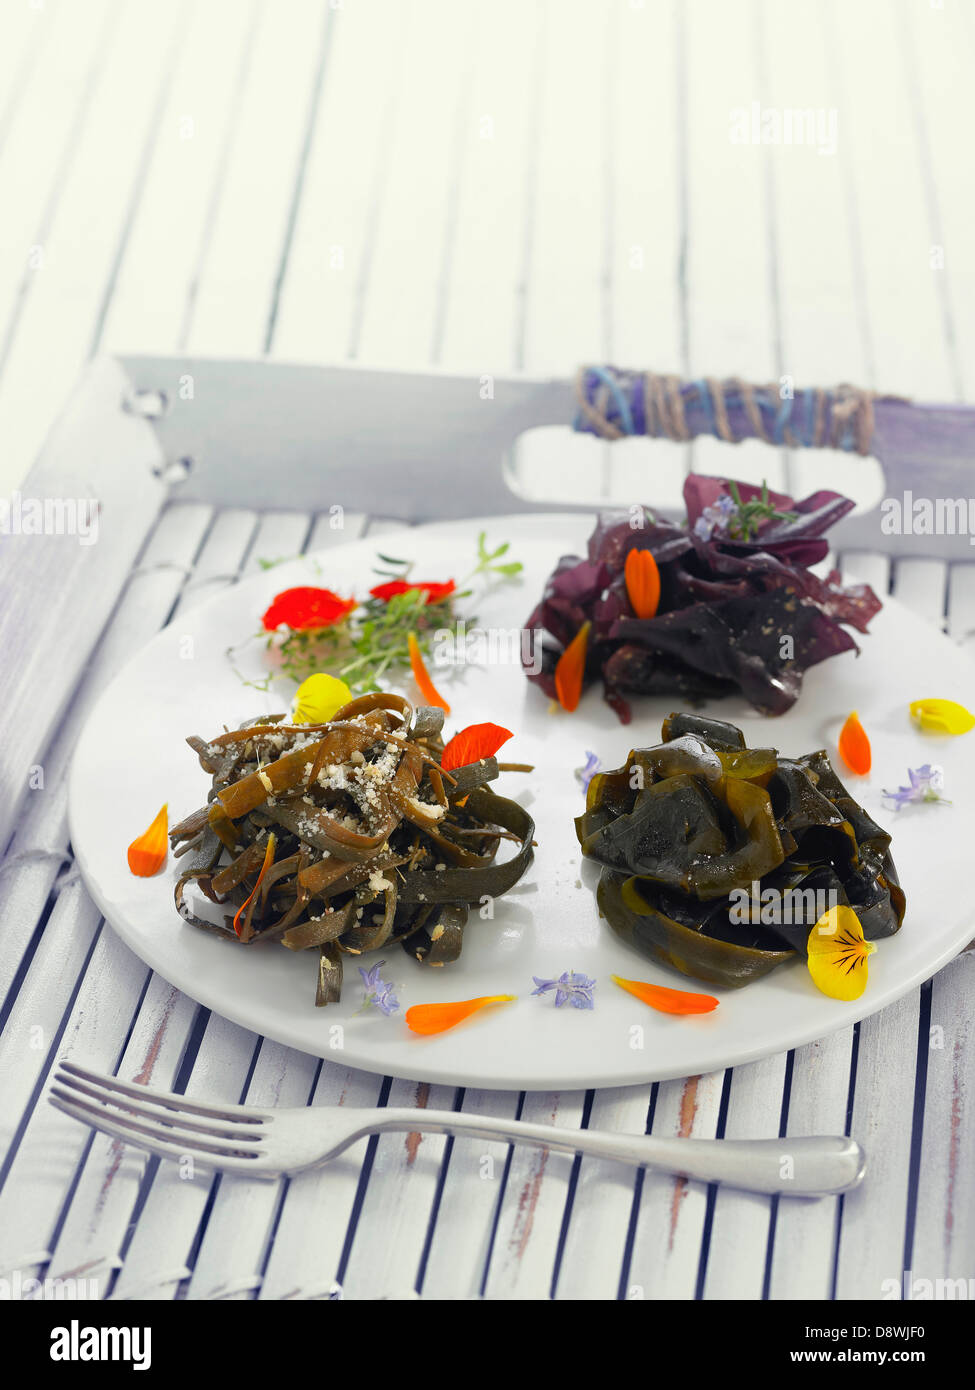 Wakame seaweed nest and sea thong nests with flower petals Stock Photo